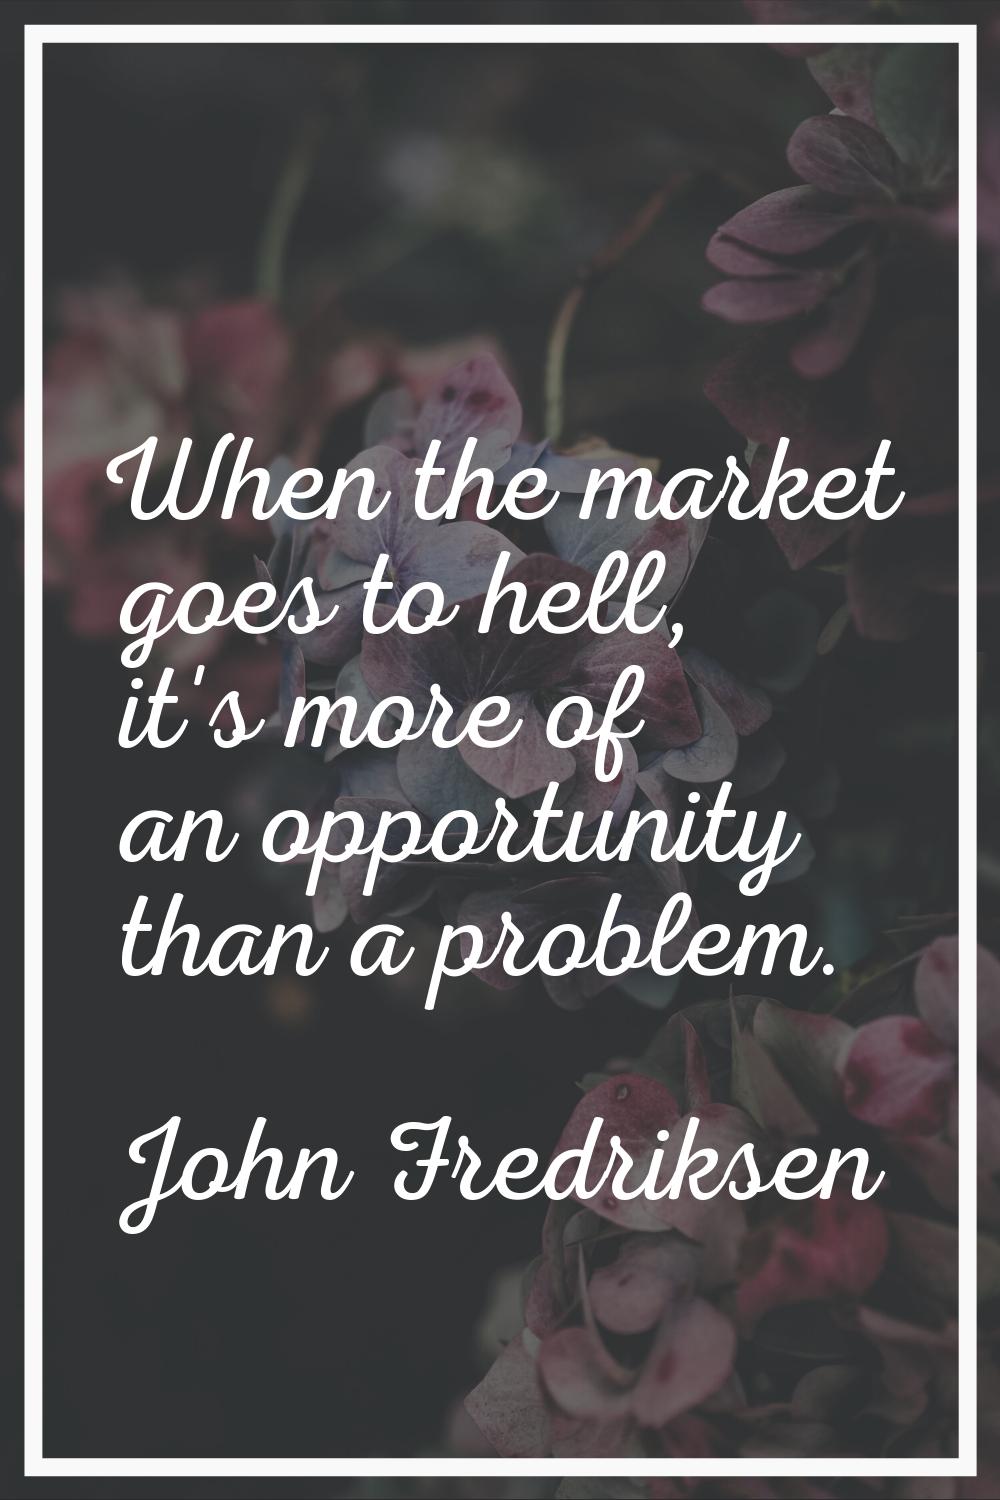 When the market goes to hell, it's more of an opportunity than a problem.